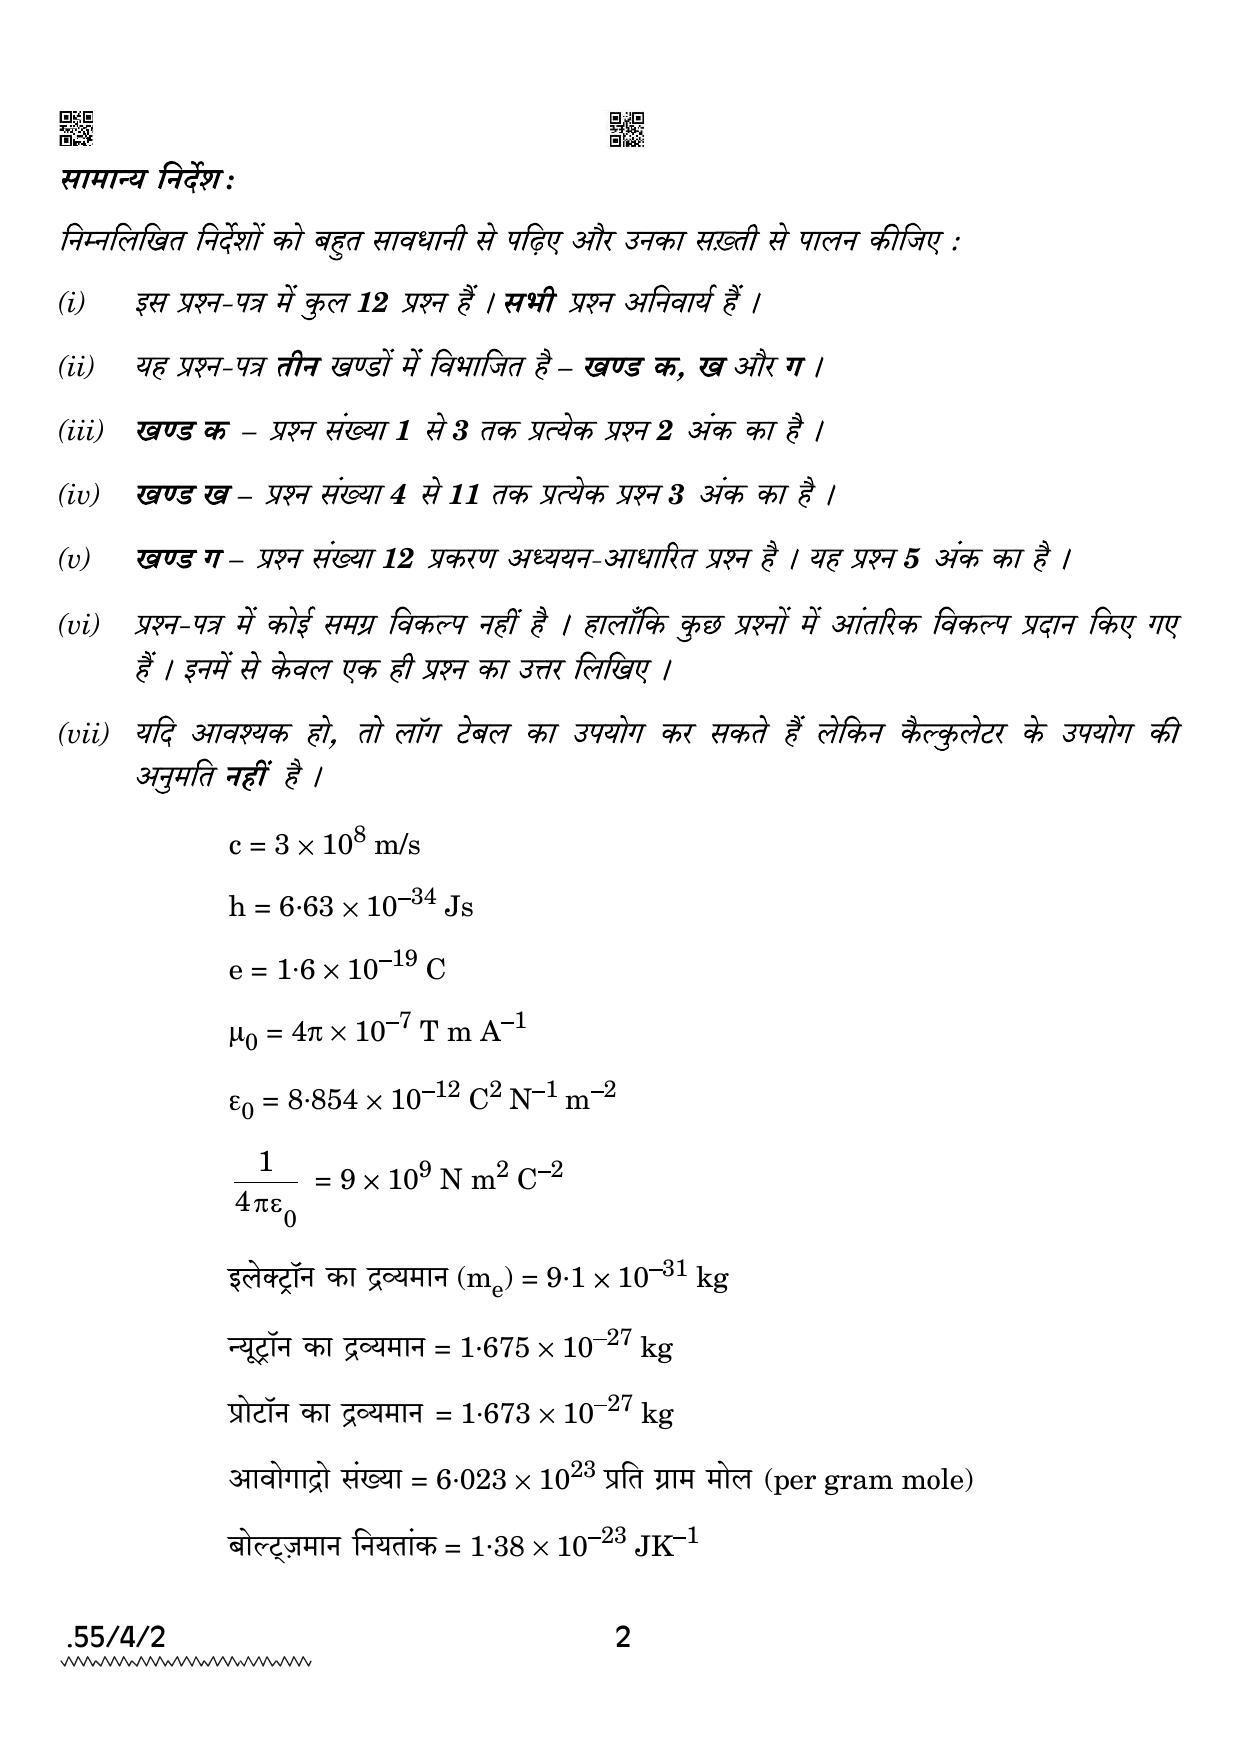 CBSE Class 12 55-4-2 Physics 2022 Question Paper - Page 2